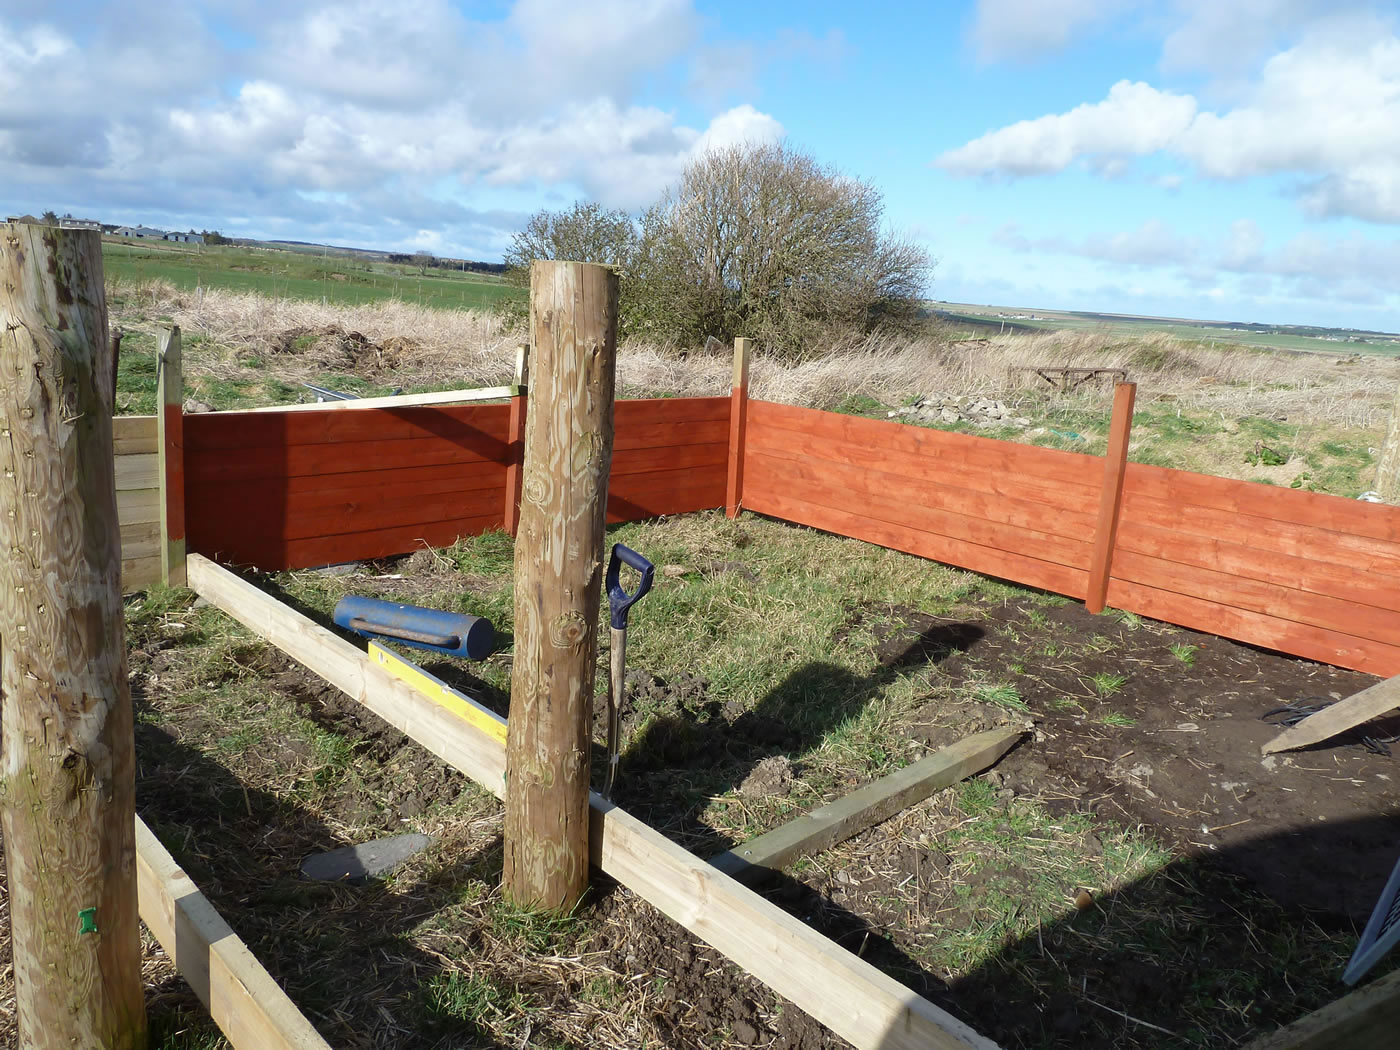 Picture of the start of our outdoor run area and pig house for our pet pigs